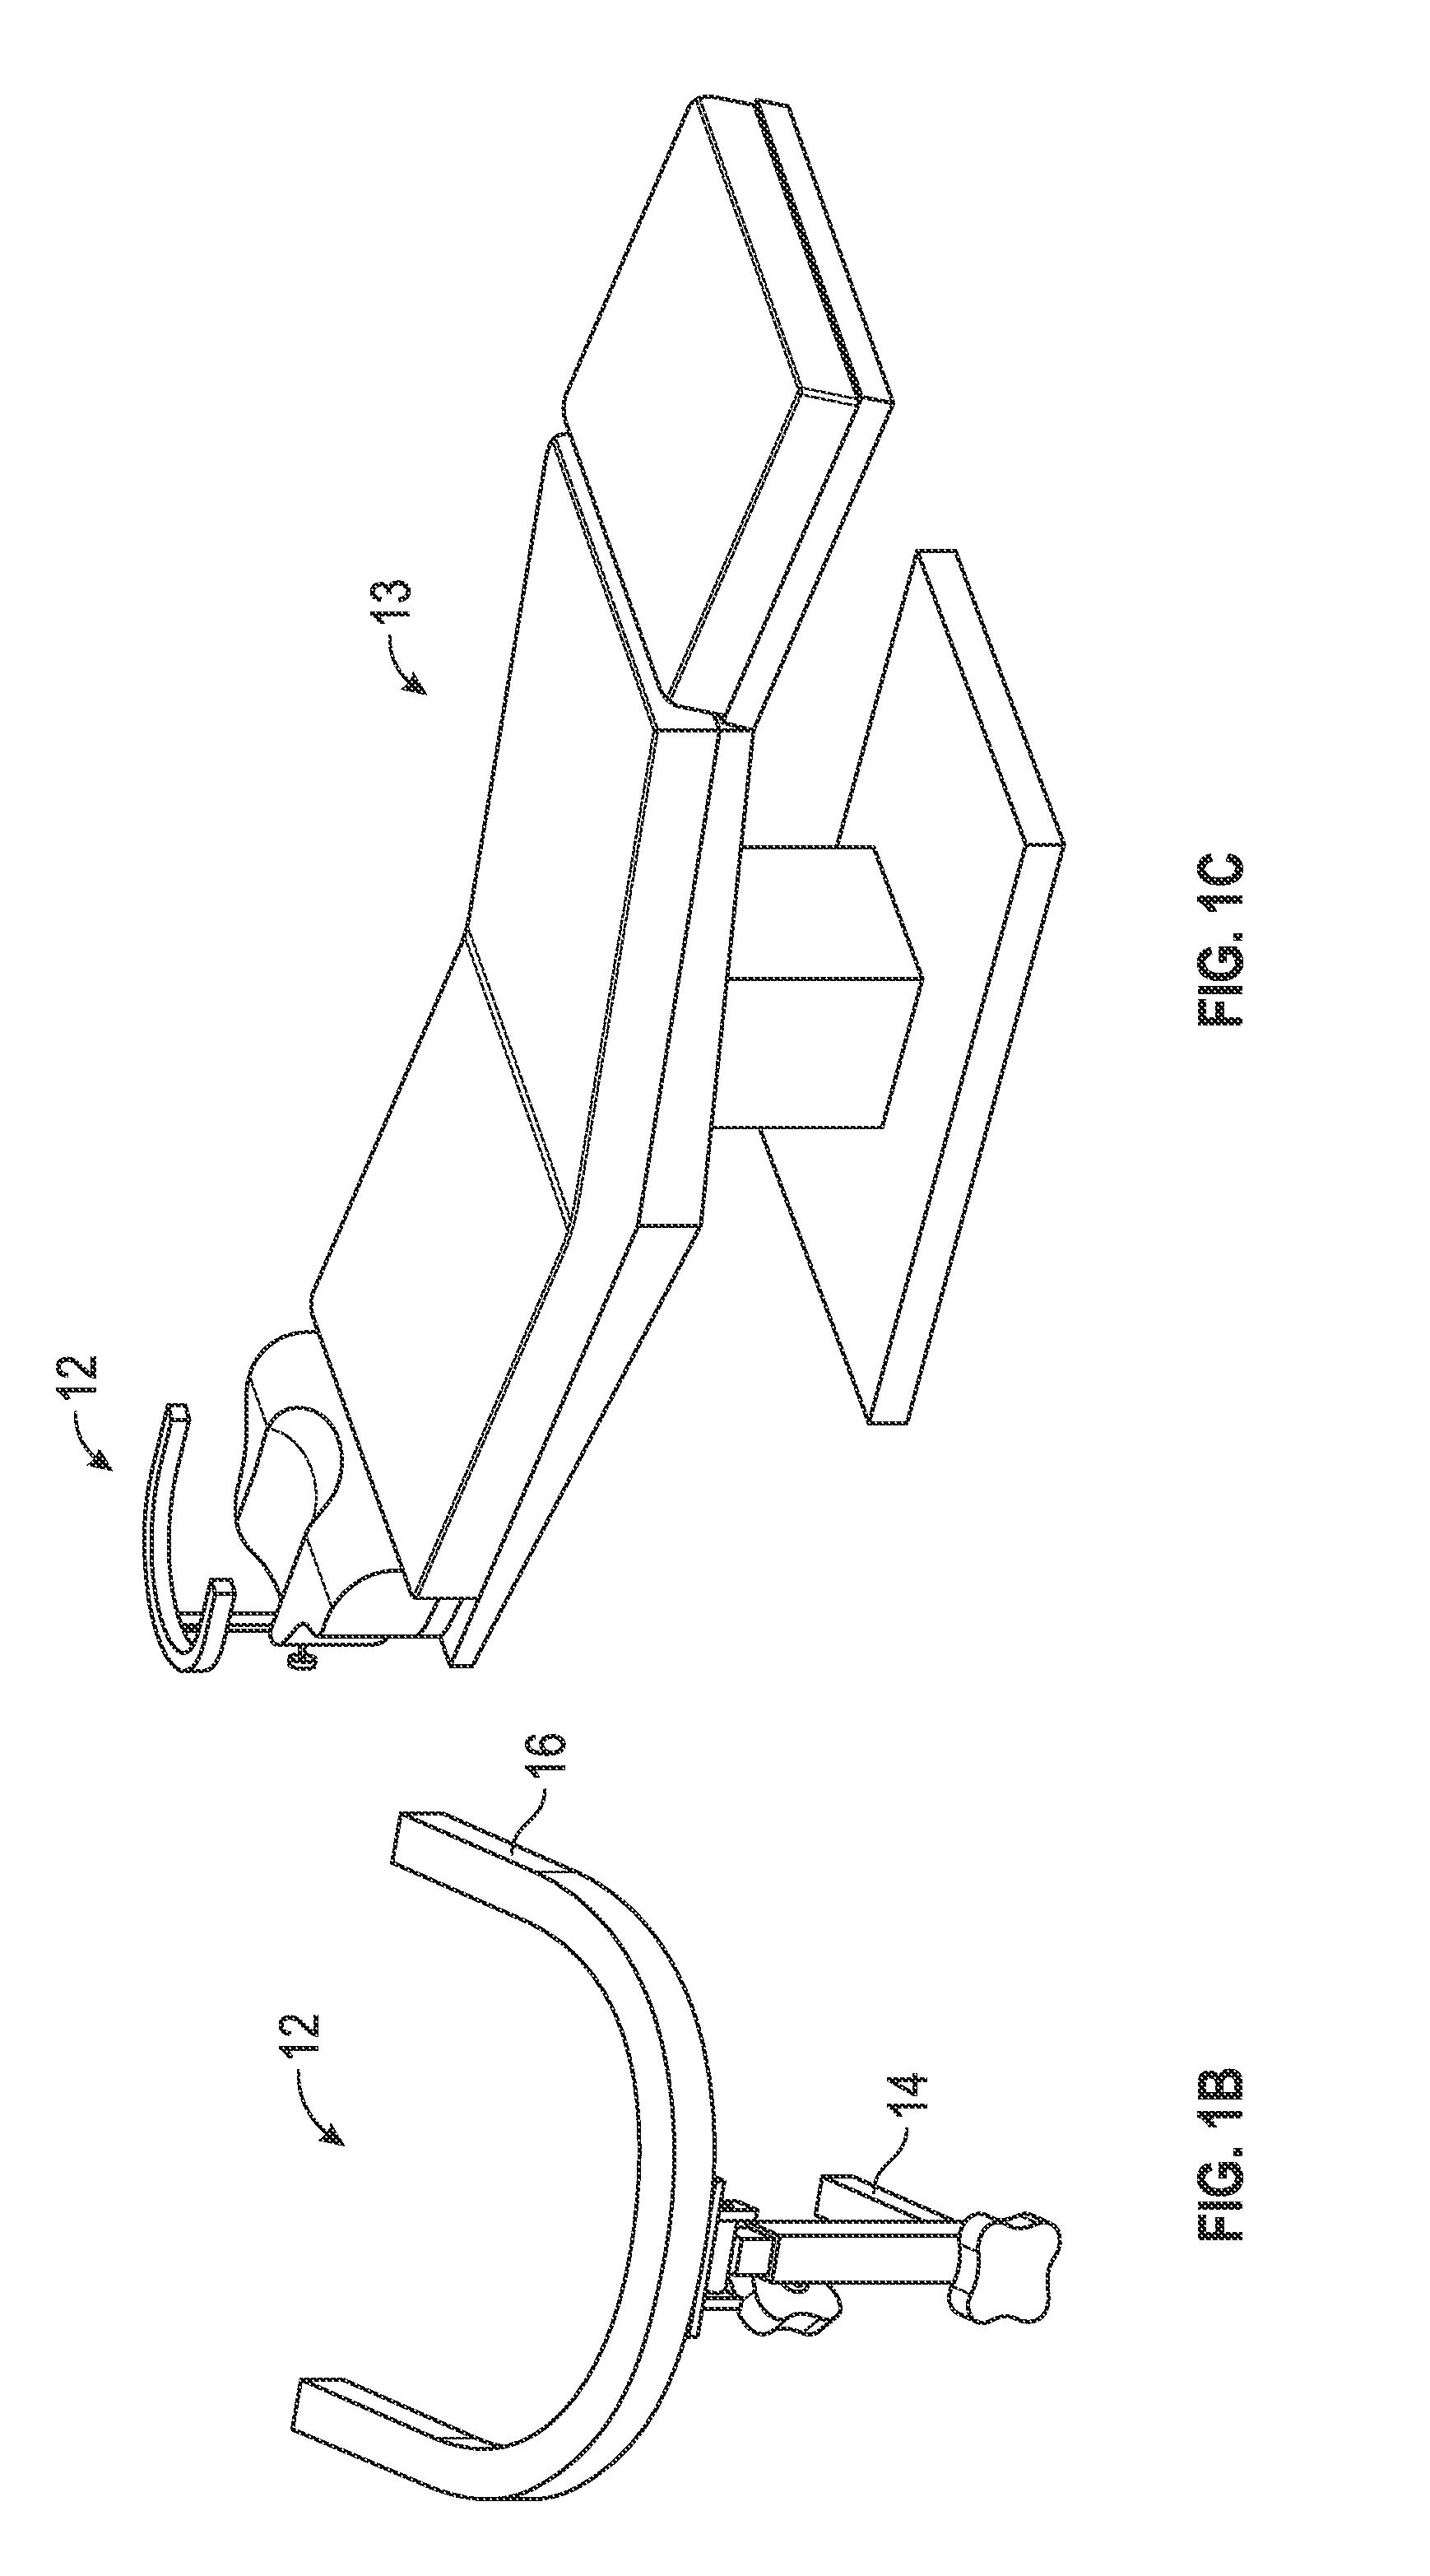 Ophthalmic surgical systems, methods, and devices